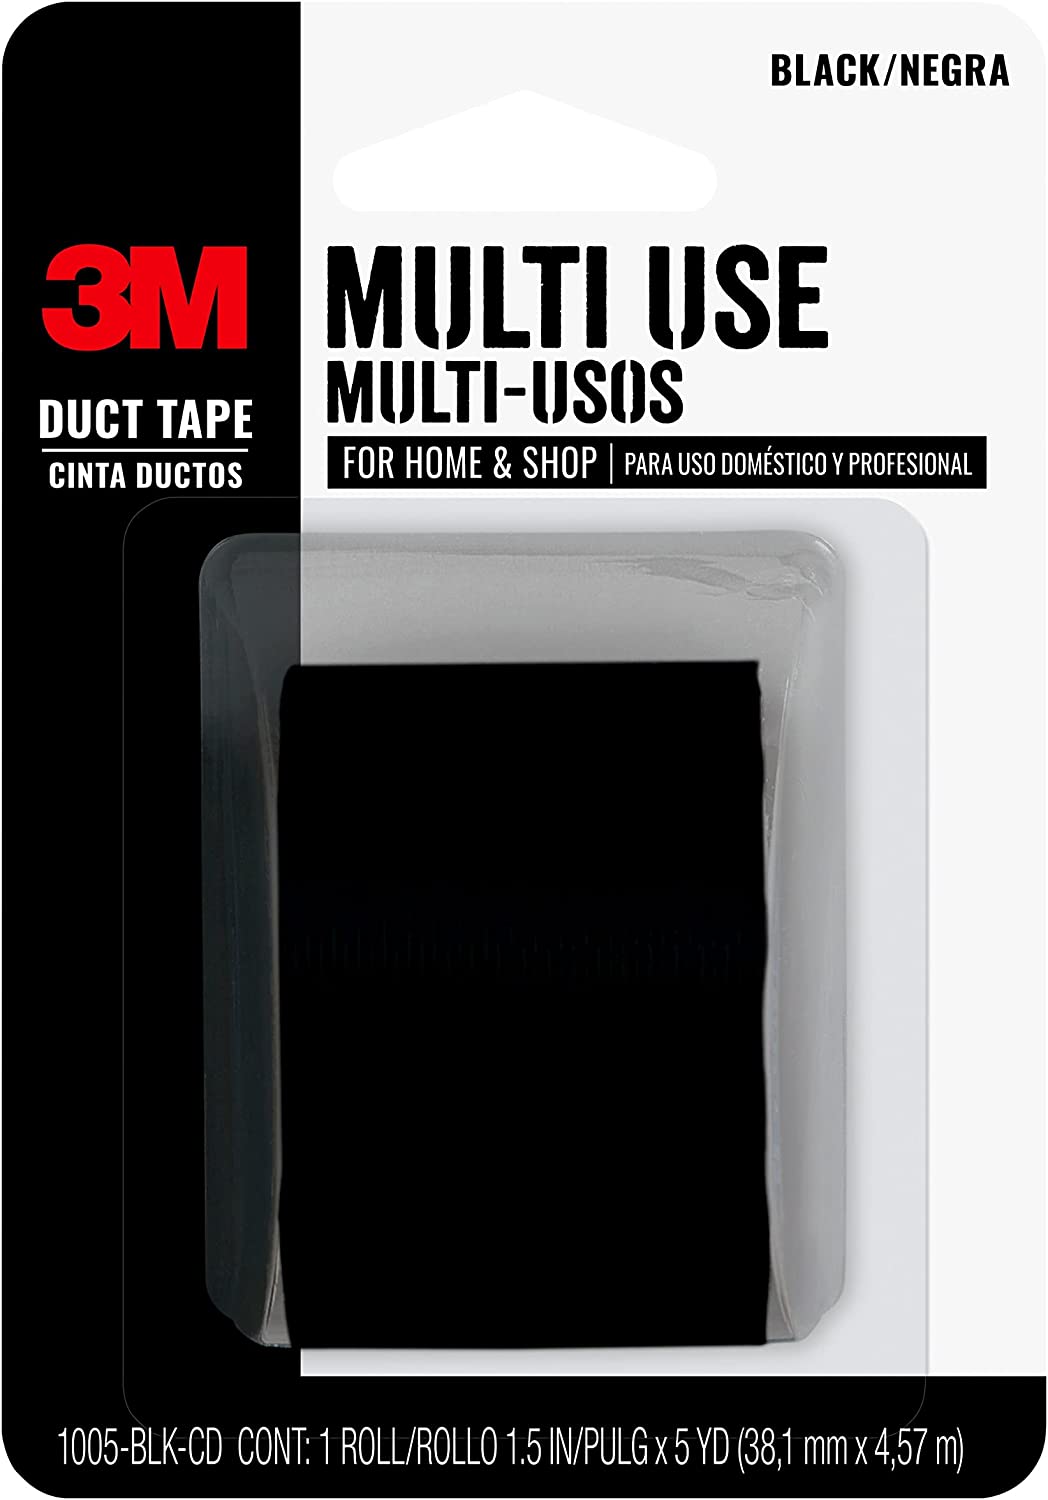 ''3M Multi-Use Duct TAPE, 1.5 inches by 5 yards, Black, 1005-BLK-CD, 1 roll''